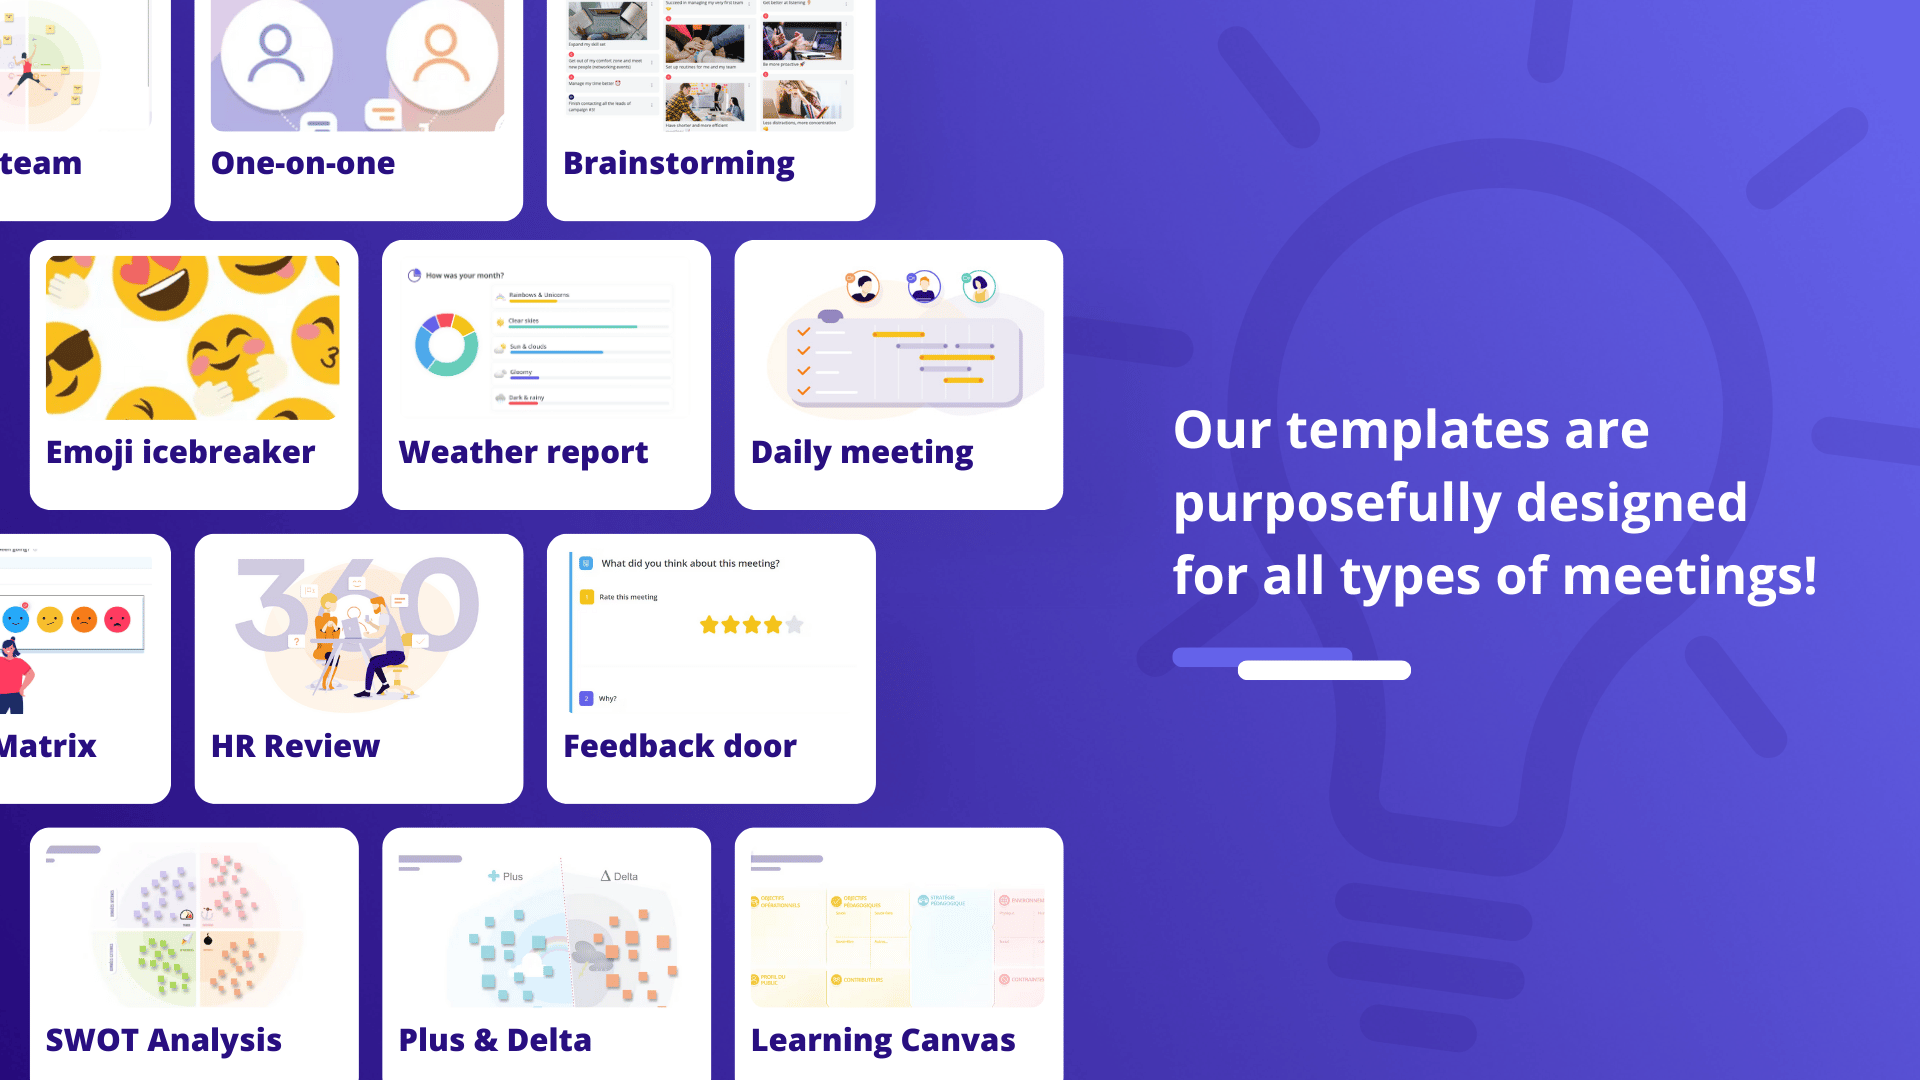 Beekast - Need some inspiration? Beekast provides templates to help you lead better meetings and trainings that meet your goals.